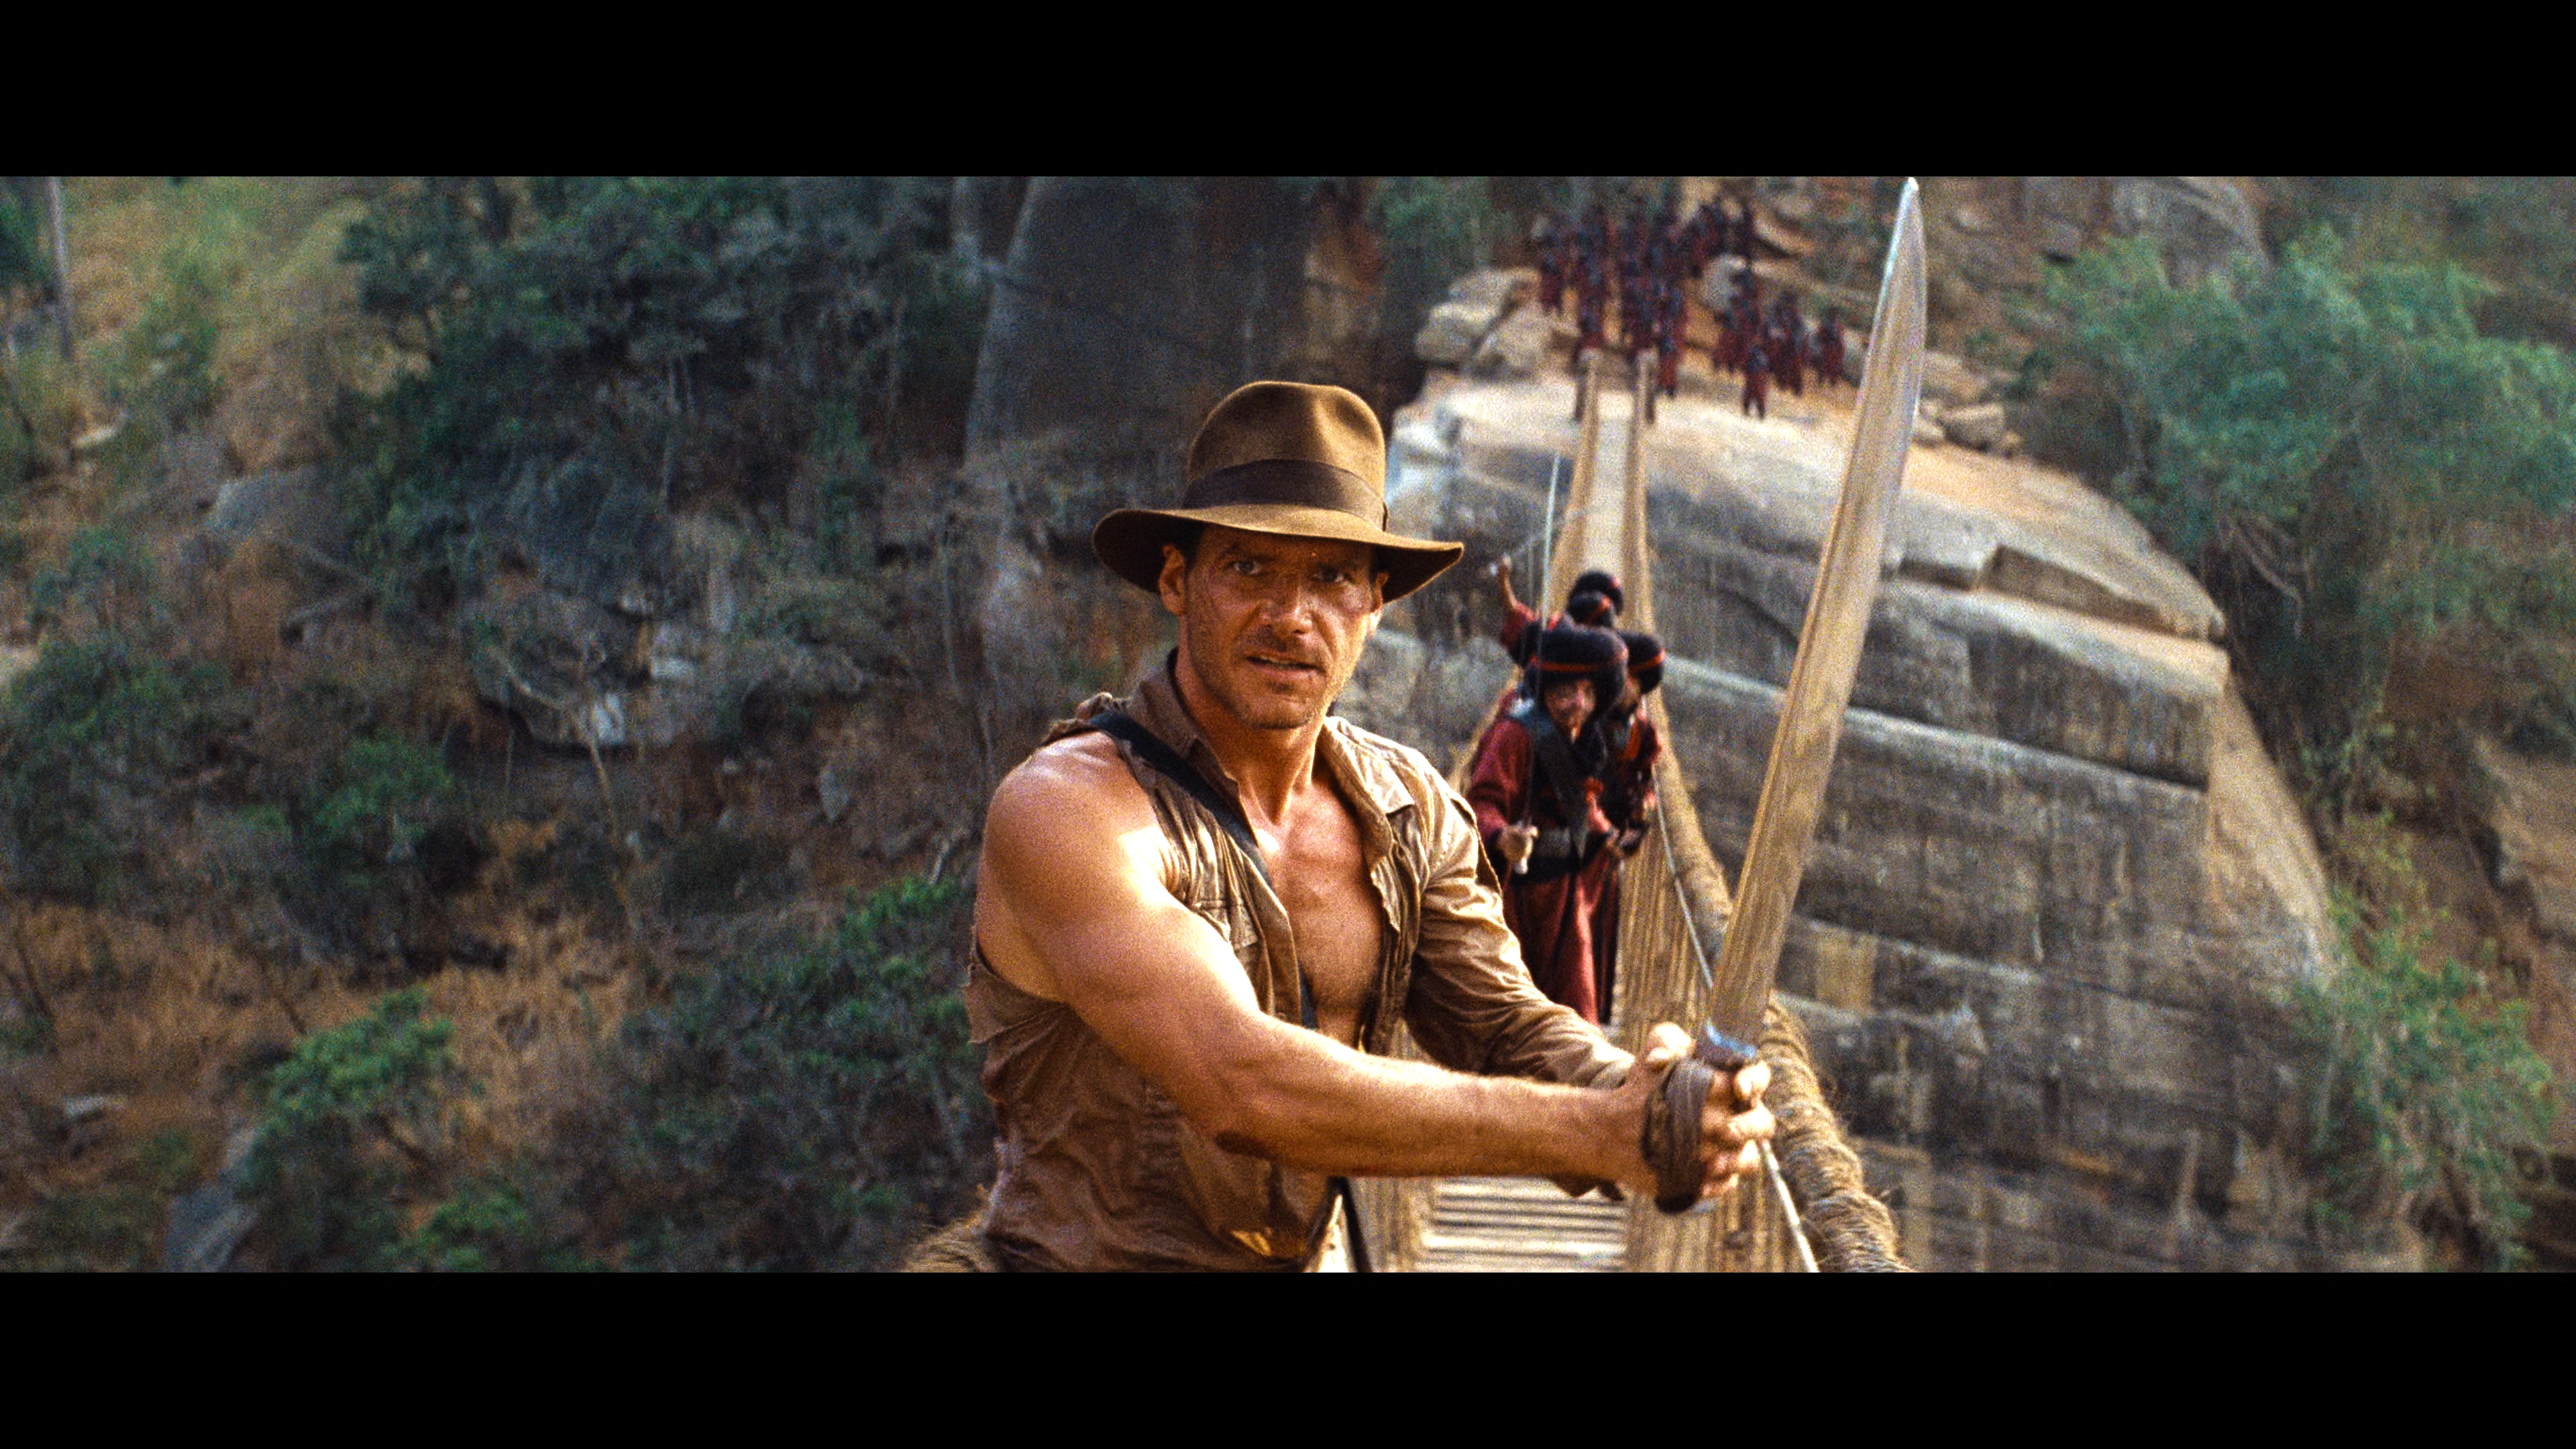 Indiana Jones and the Temple of Doom - 4K Ultra HD Blu-ray [SteelBook]  Ultra HD Review